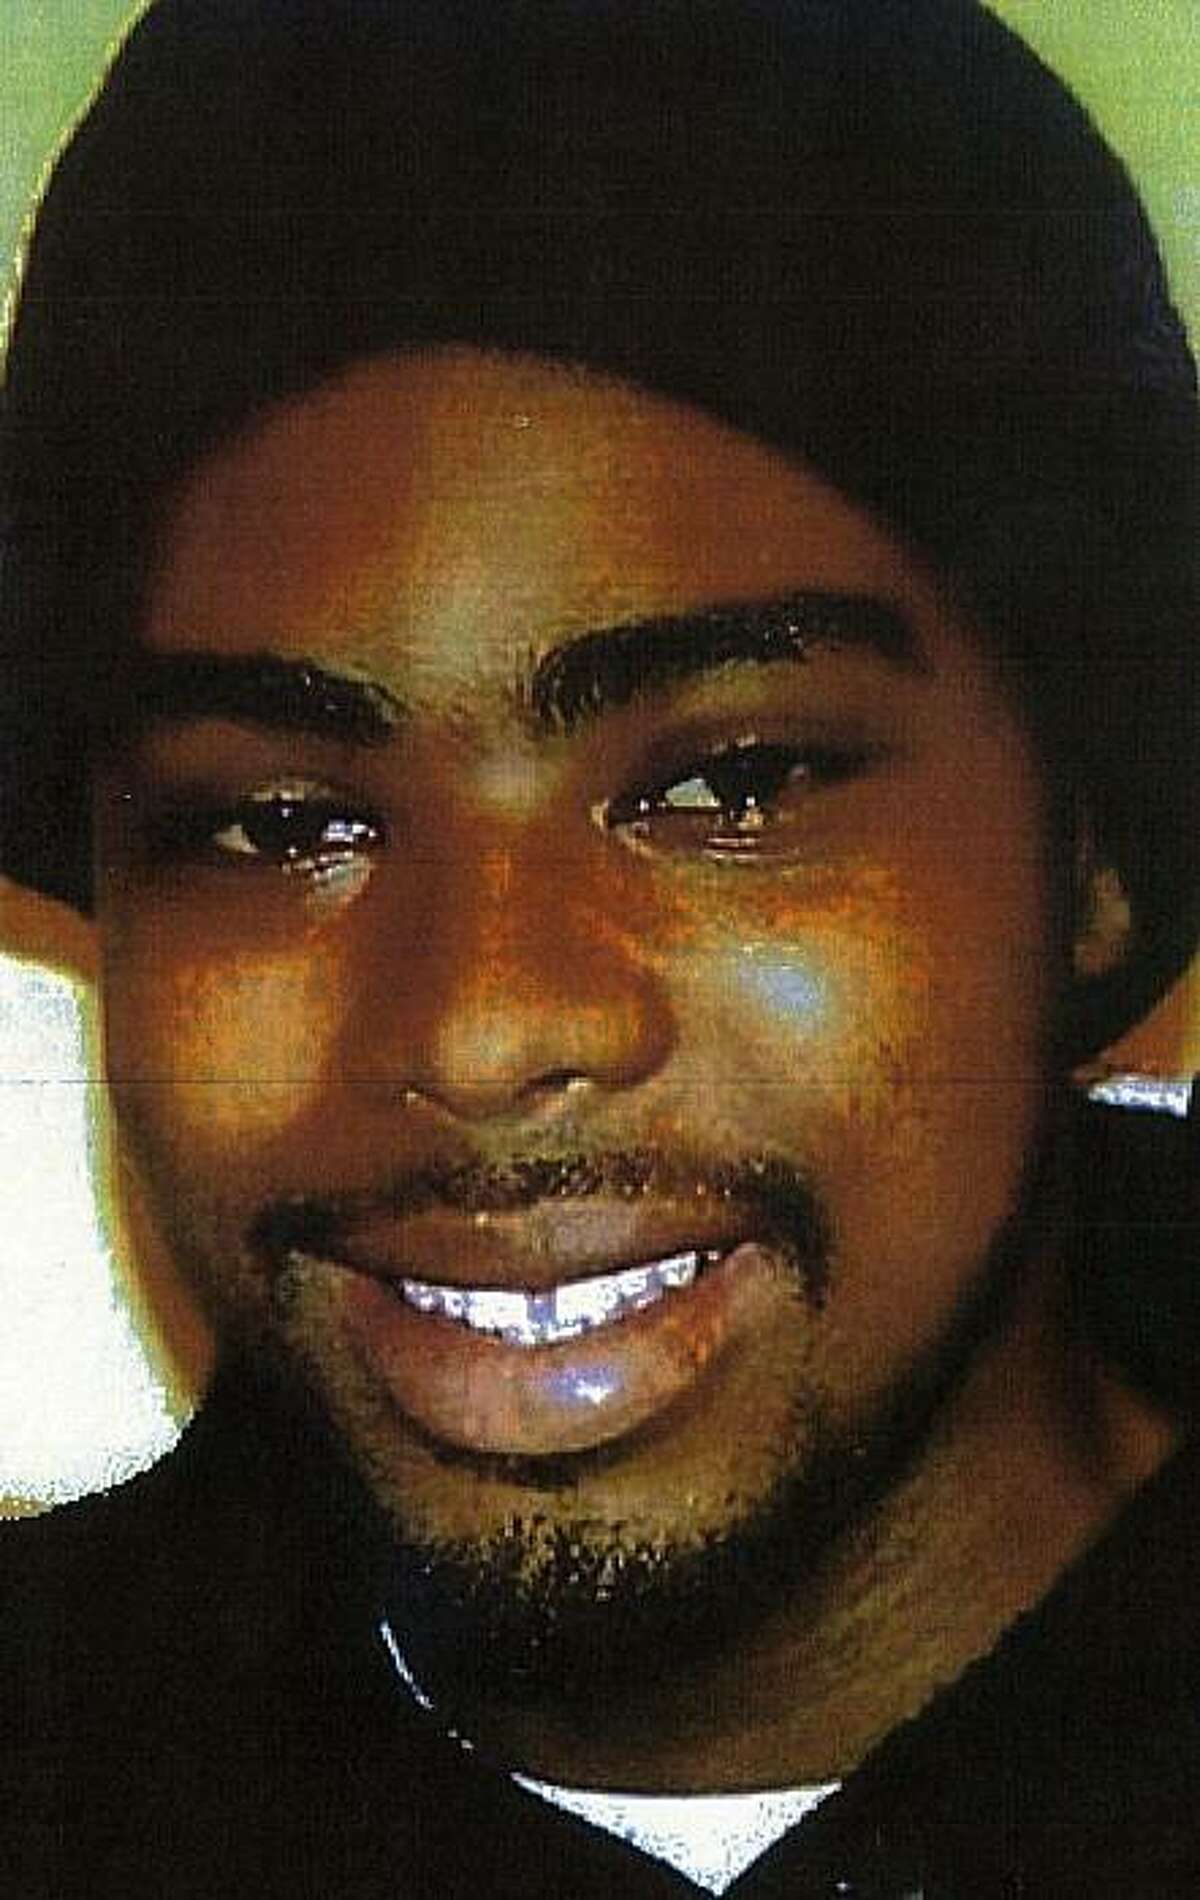 This image provided by the Los Angeles County Superior Court shows Oscar Grant who was shot by former San Francisco Bay Area Rapid Transit police officer, Johannes Mehserle on New Year's Day 2009. Mehserle testified Friday June 25, 2010 that he mistakenlypulled out his pistol instead of a stun gun when he shot and killed an unarmed black man who was lying face down on an Oakland train platform.